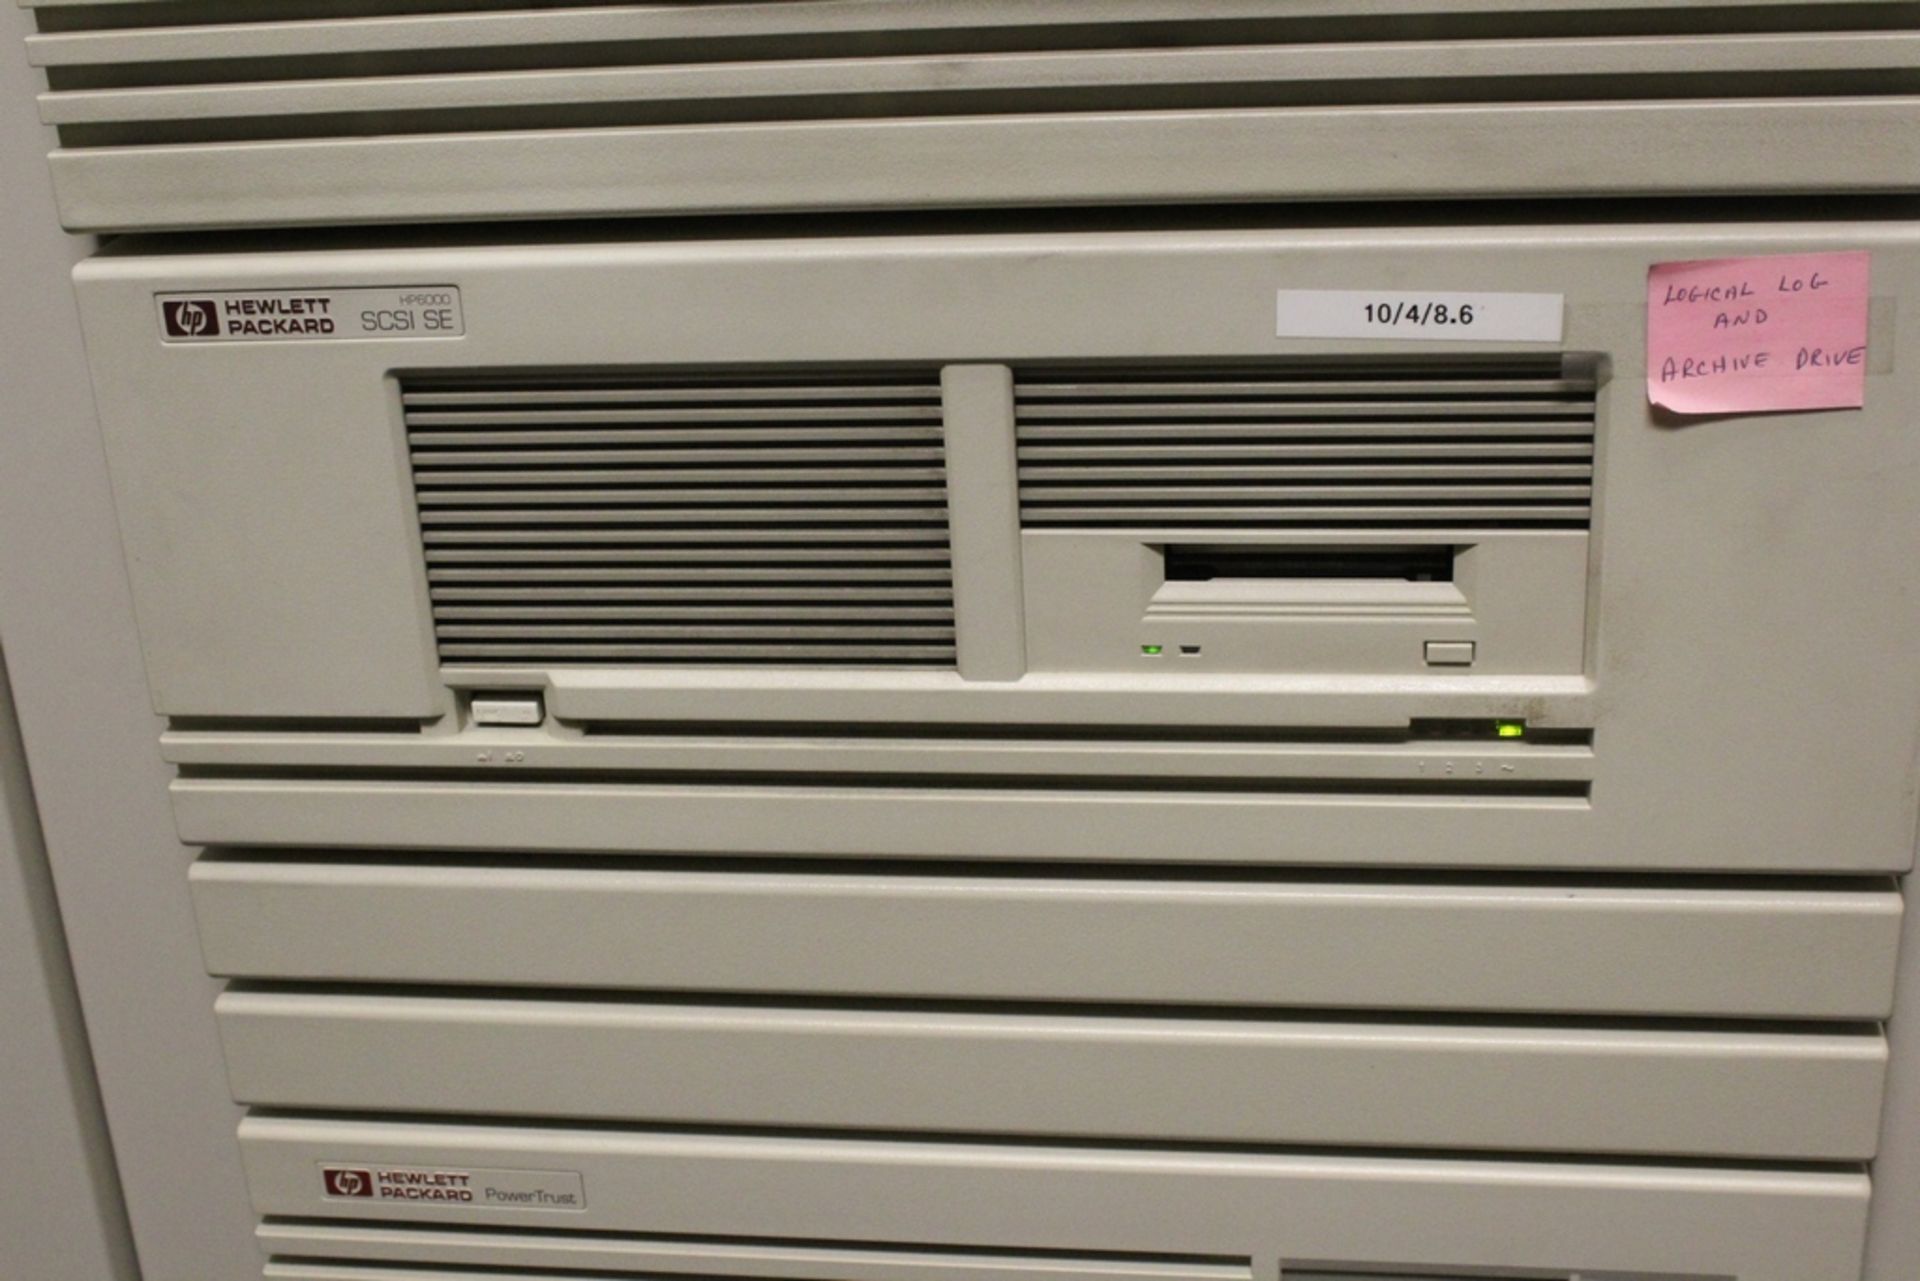 HEWLETT PACKARD SERVER SYSTEM WITH K-CLASS 9000, SCSI SE AND POWER TRUST - Image 5 of 6